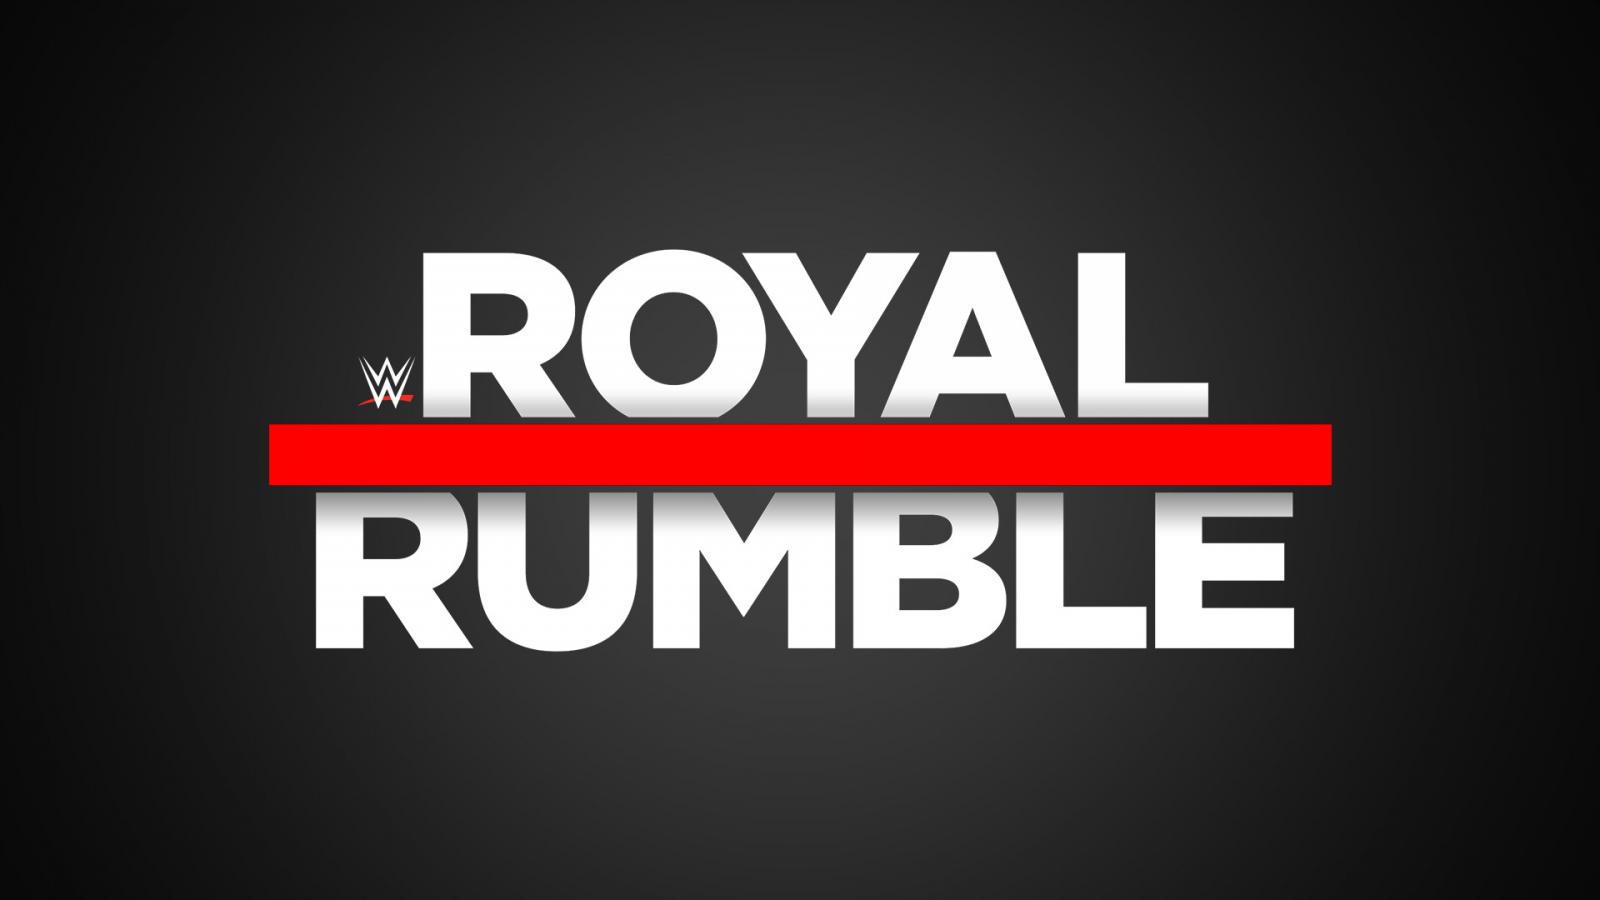 WWE Spoilers Six new entrants announced for the 2017 Royal Rumble Match